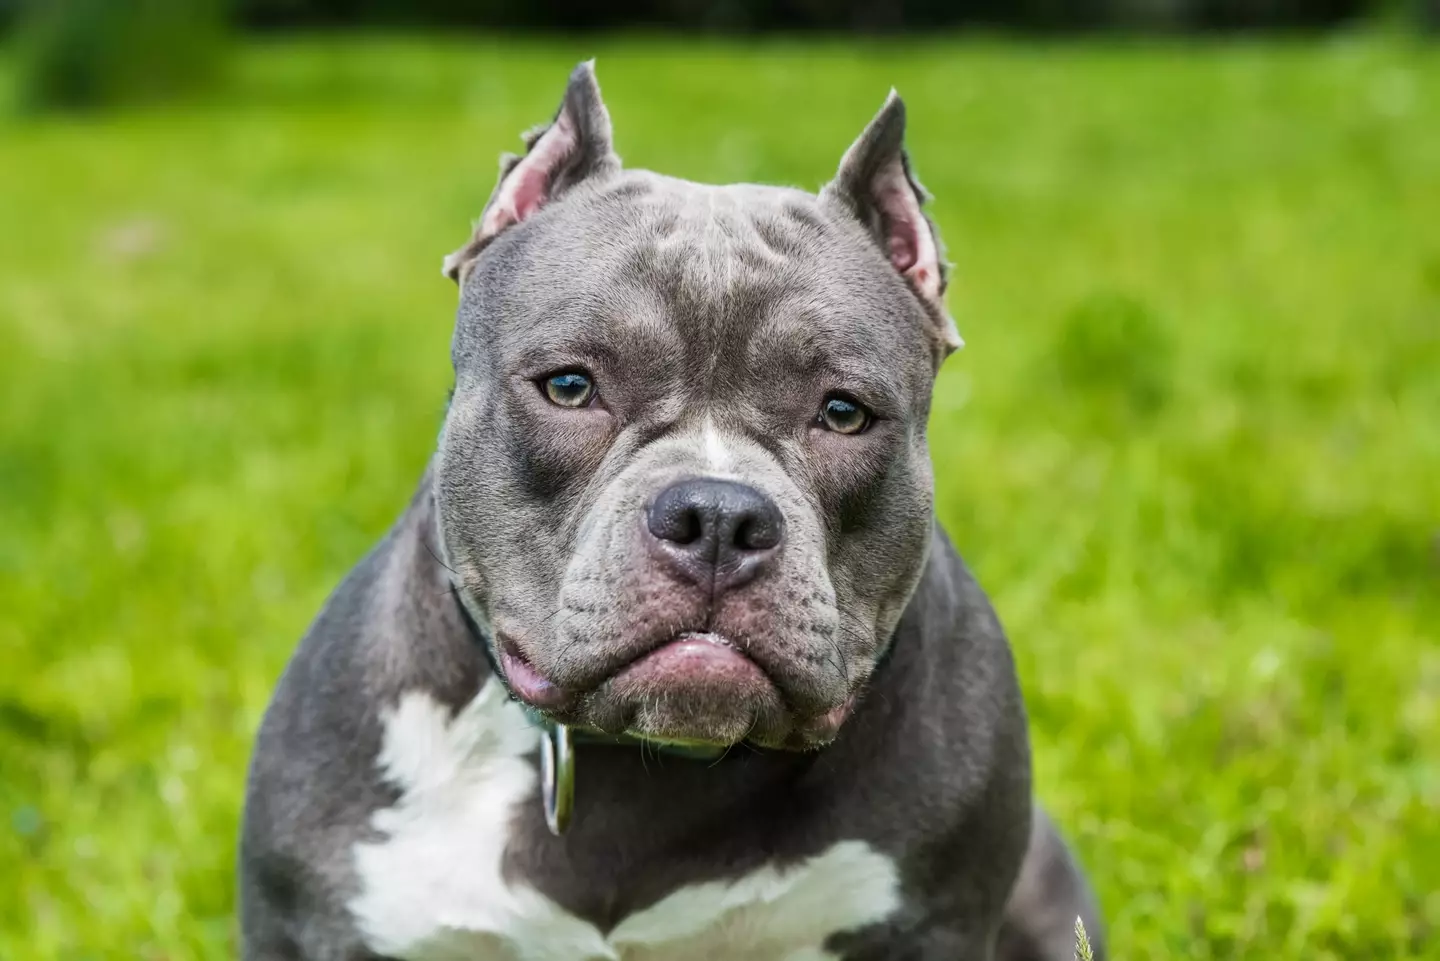 XL American bully dogs could be banned in the UK.